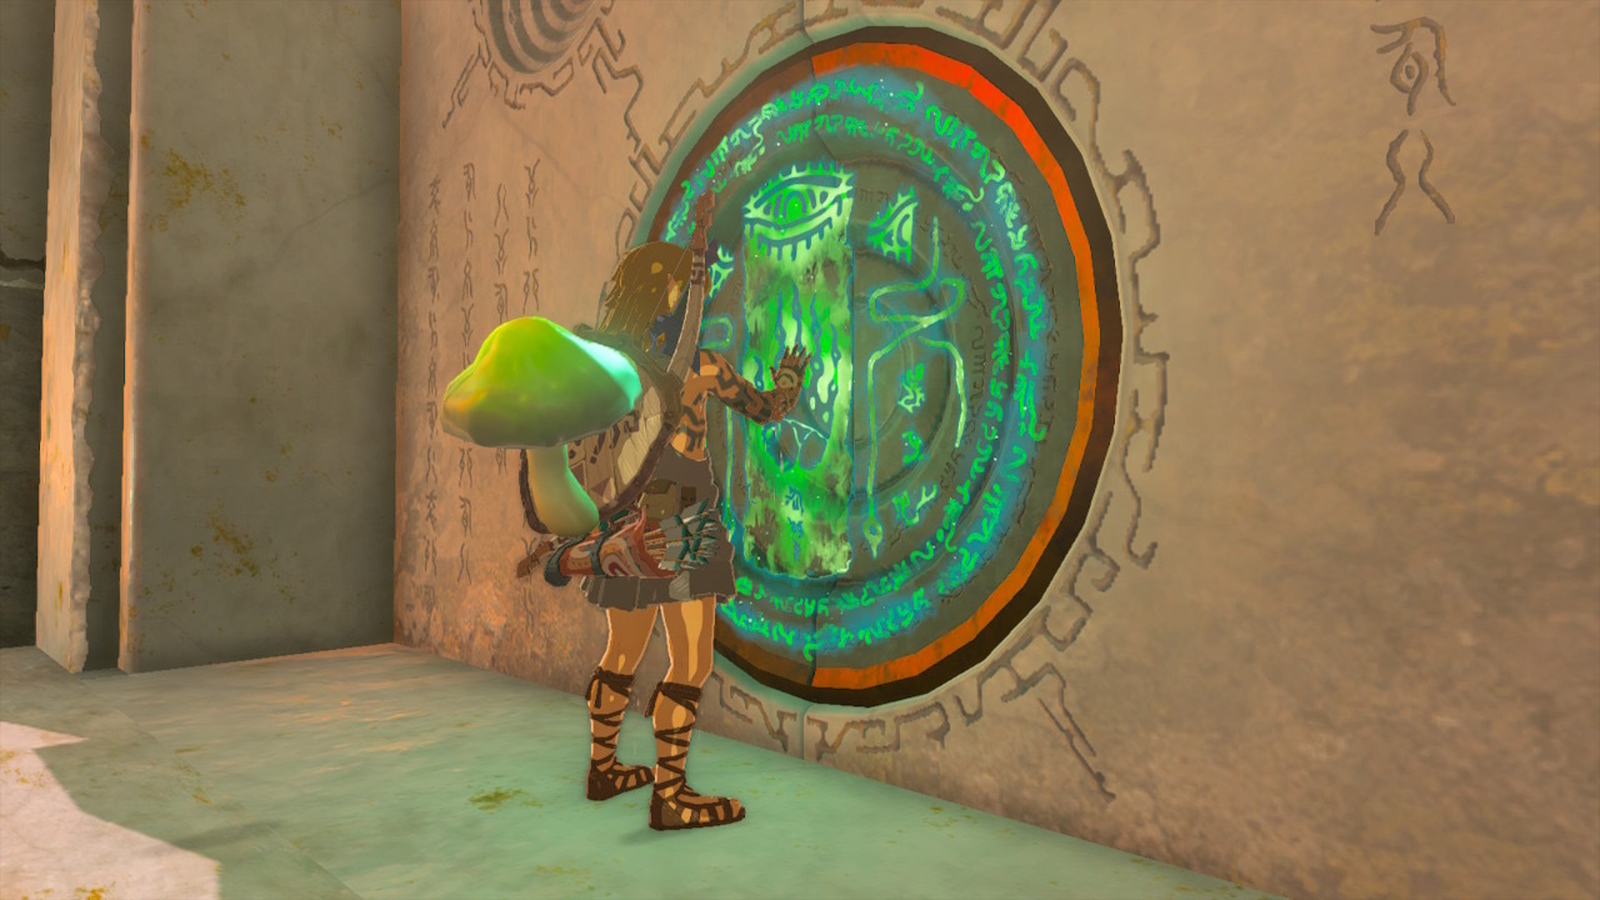 Zelda: Breath of the Wild's initial Shrines have a secret message